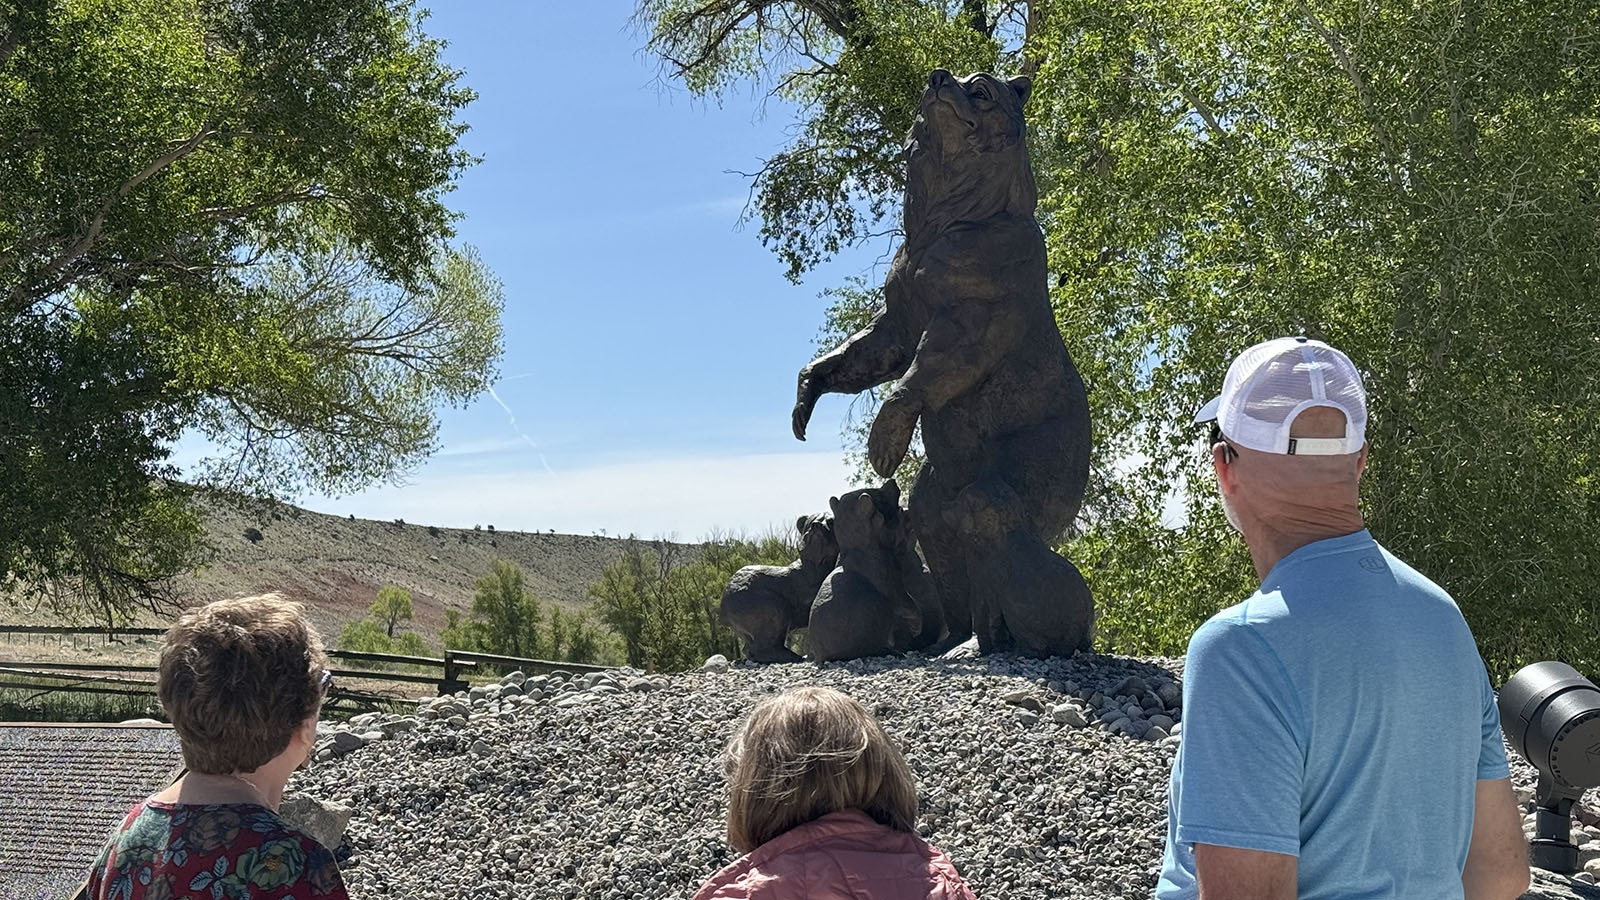 Visitors admire the bronze sculpture of Grizzly 399 and her four cubs in Dubois. The sculpture was funded by the Grizzly 399 Project, an initiative of the Deidre Bainbridge Wildlife Fund.